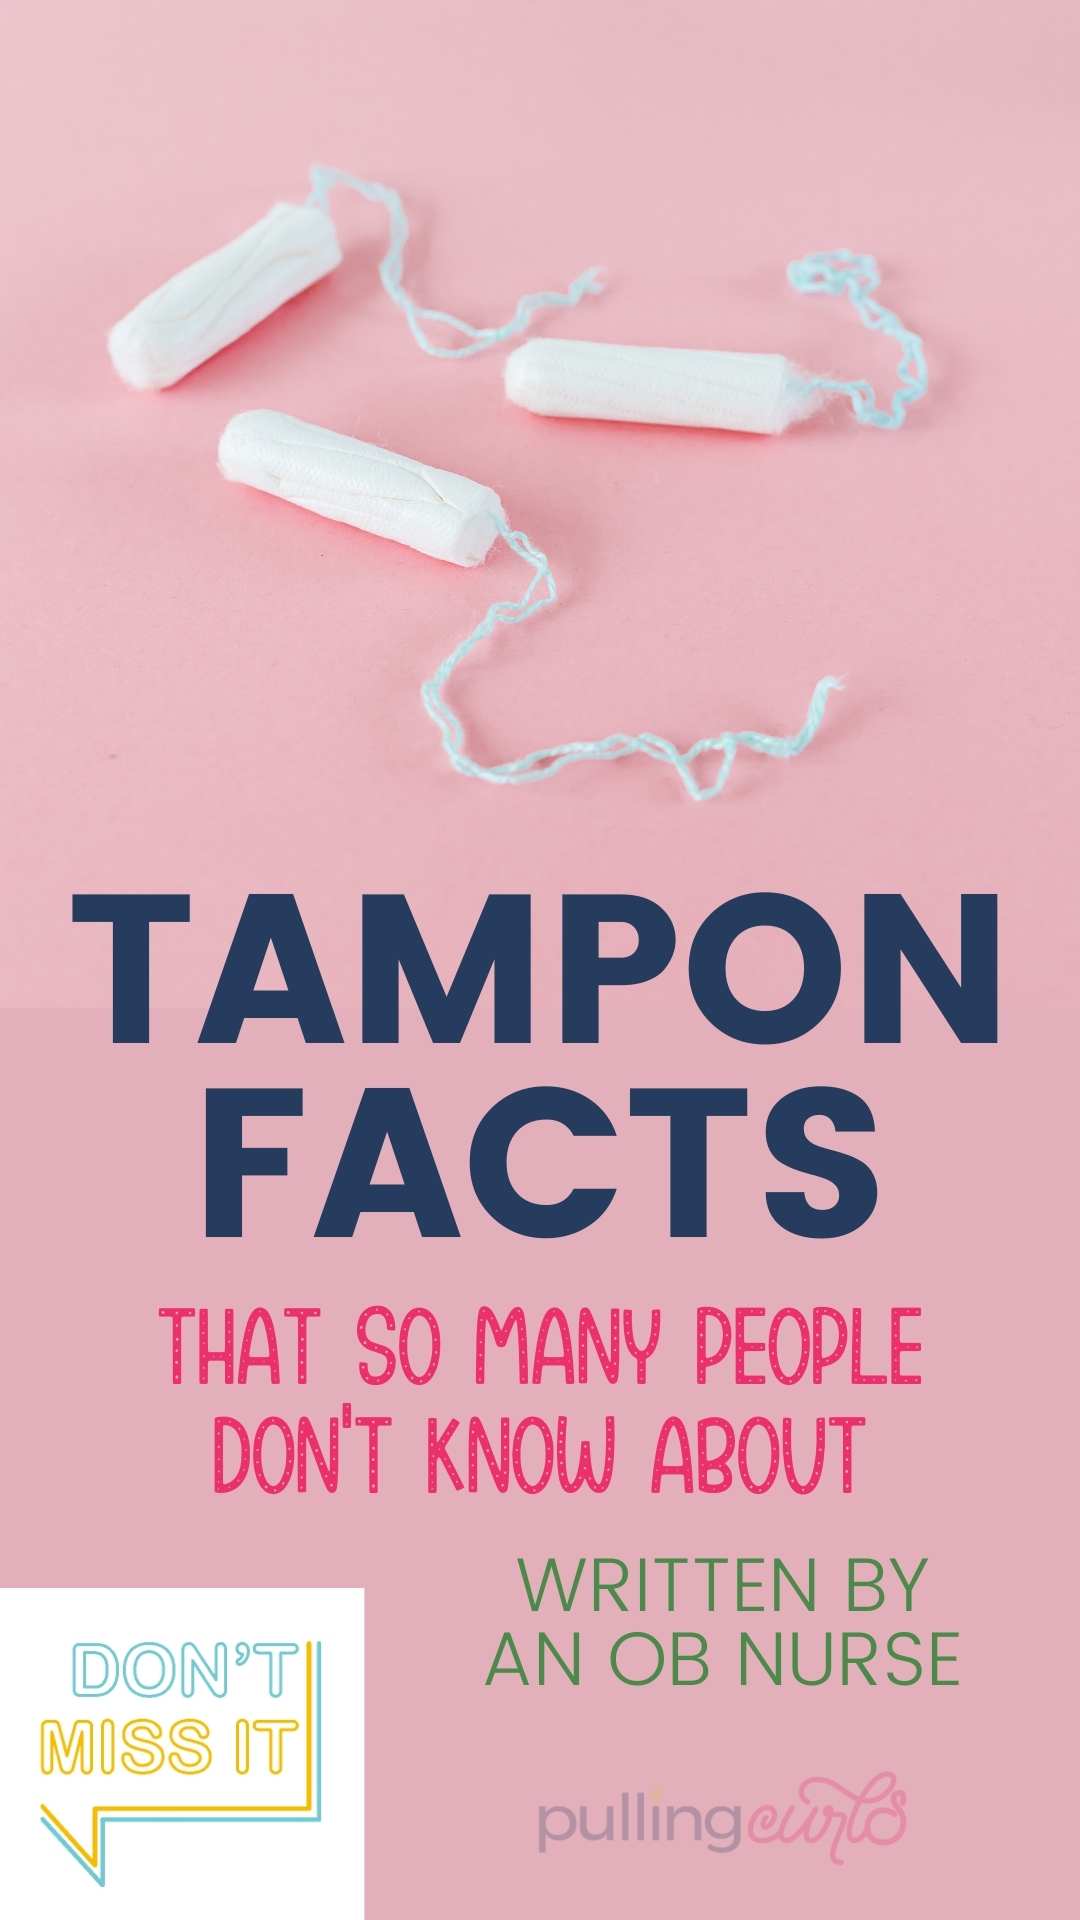 Hot to use a tampon, can you pee with it? What can't you do with it in? via @pullingcurls